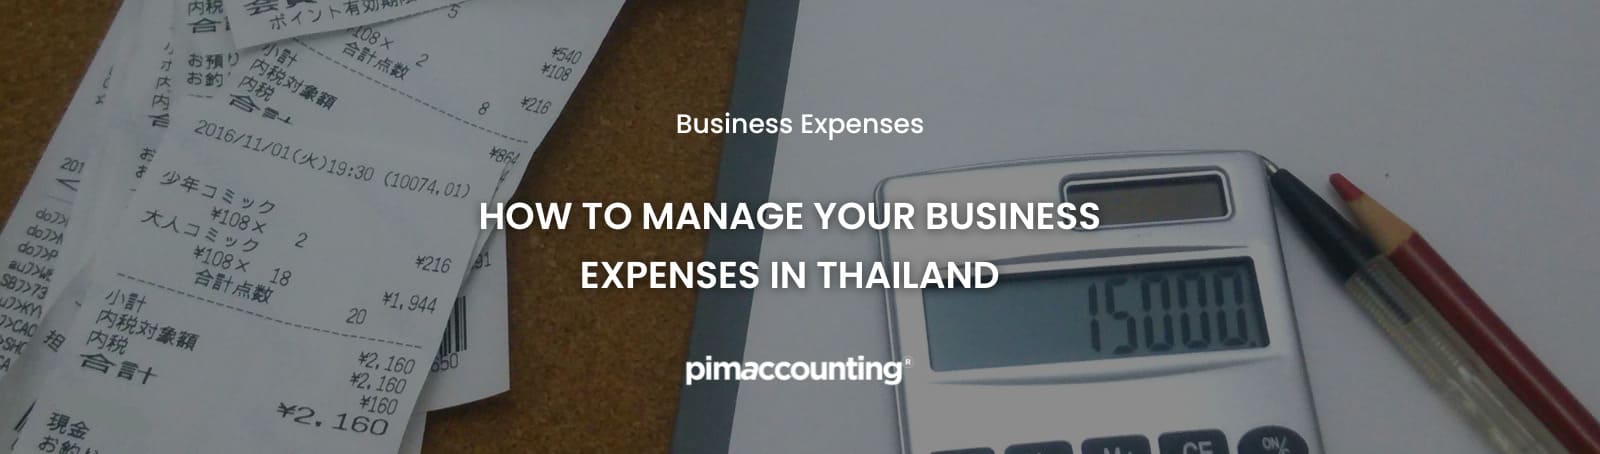 Business Expenses - Pimaccounting